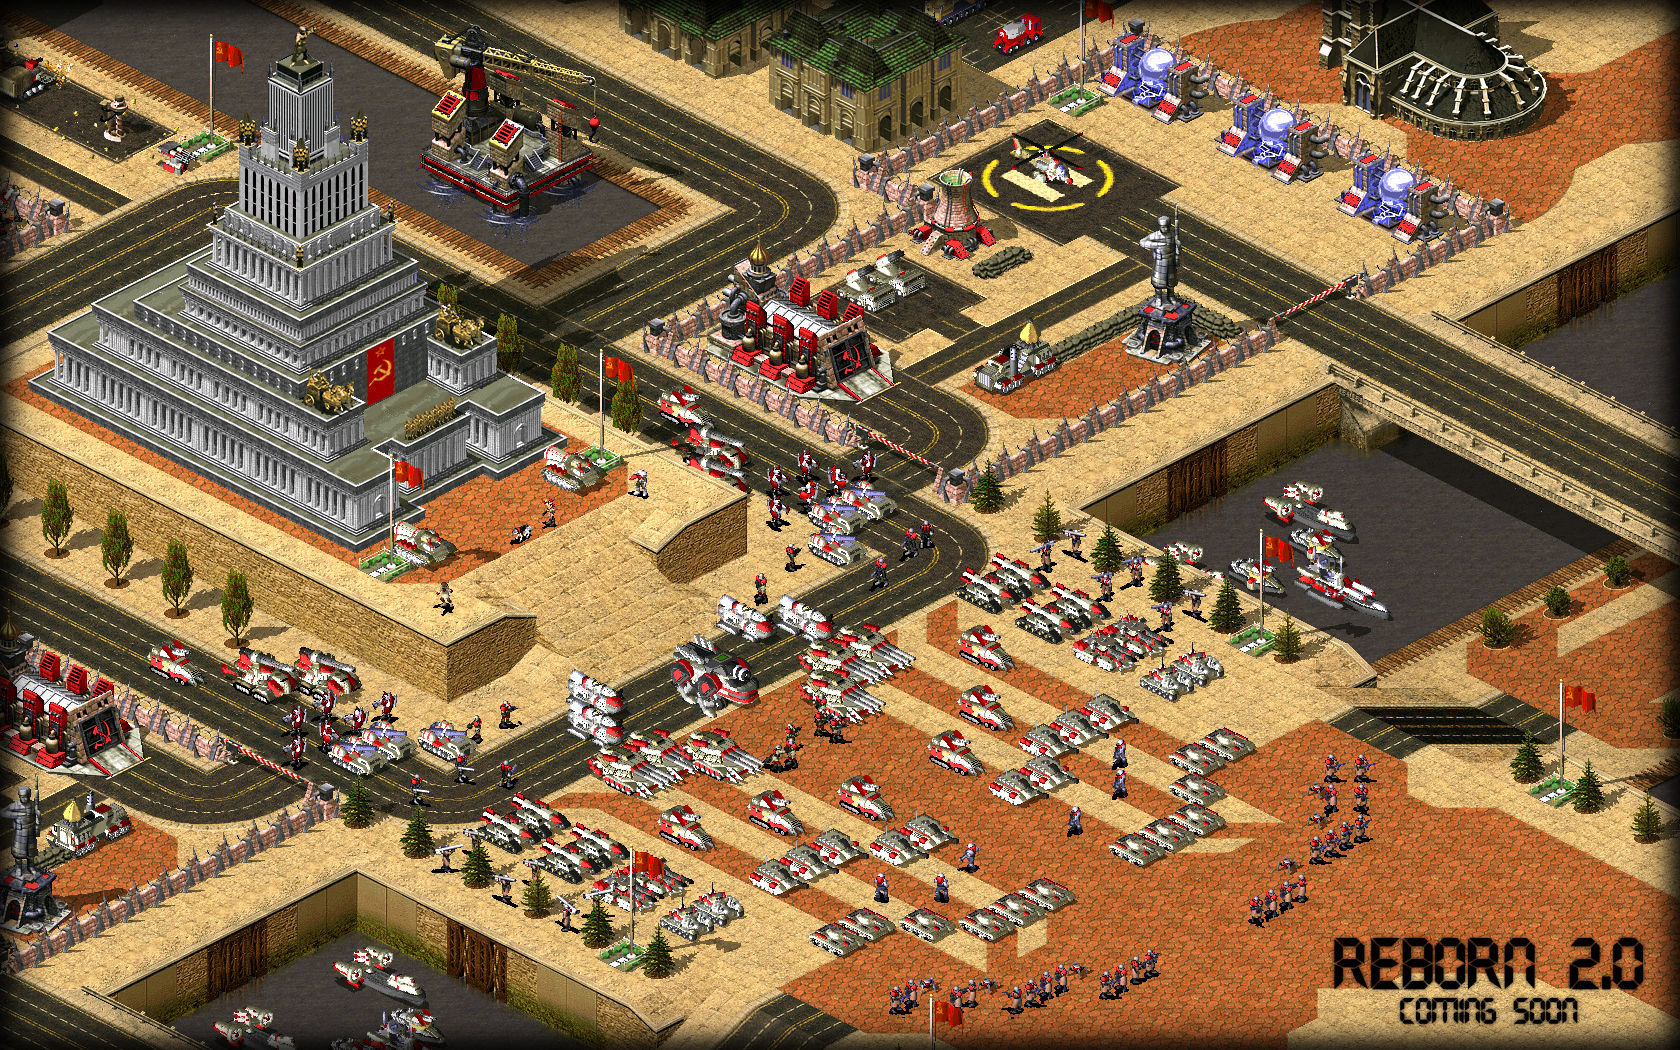 red alert 1 free download full version for pc